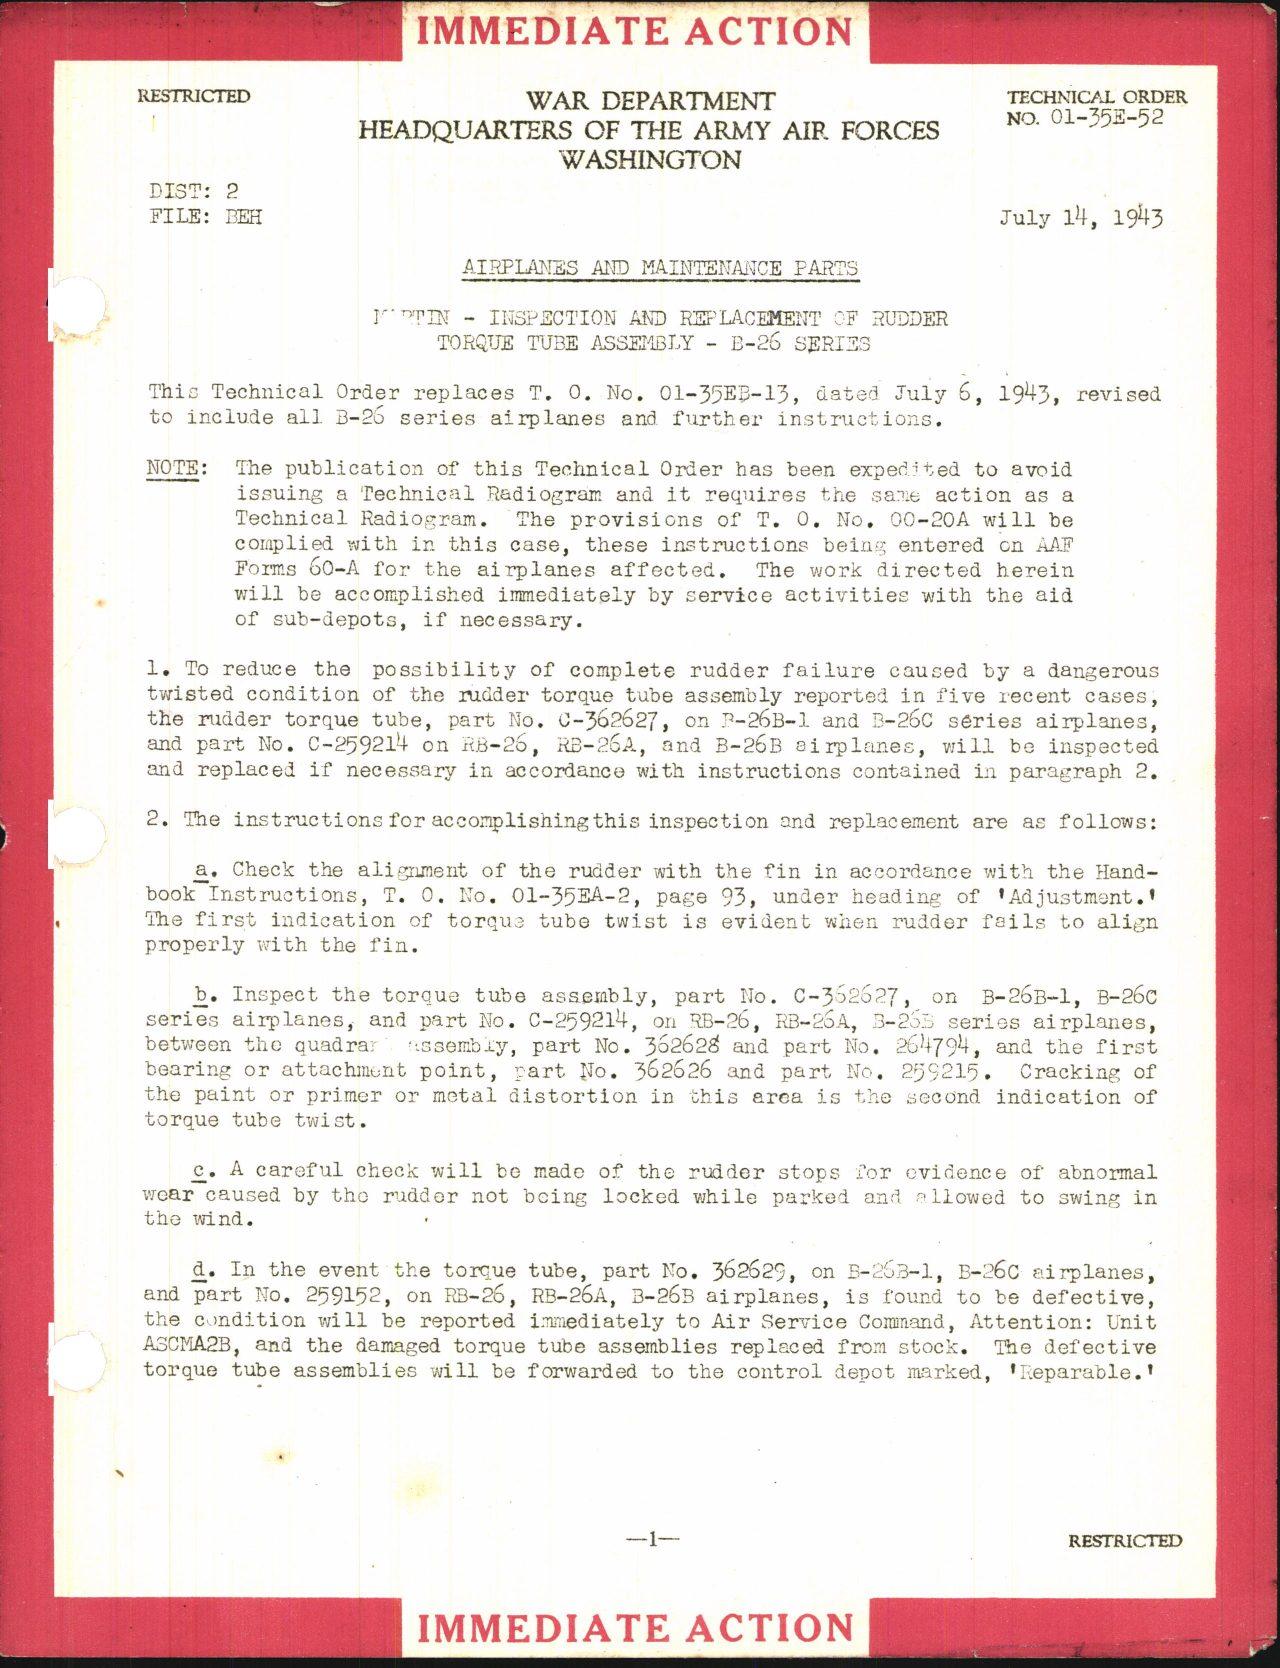 Sample page 1 from AirCorps Library document: Inspection and Replacement of Rudder Torque Tube Assembly for B-26 Series